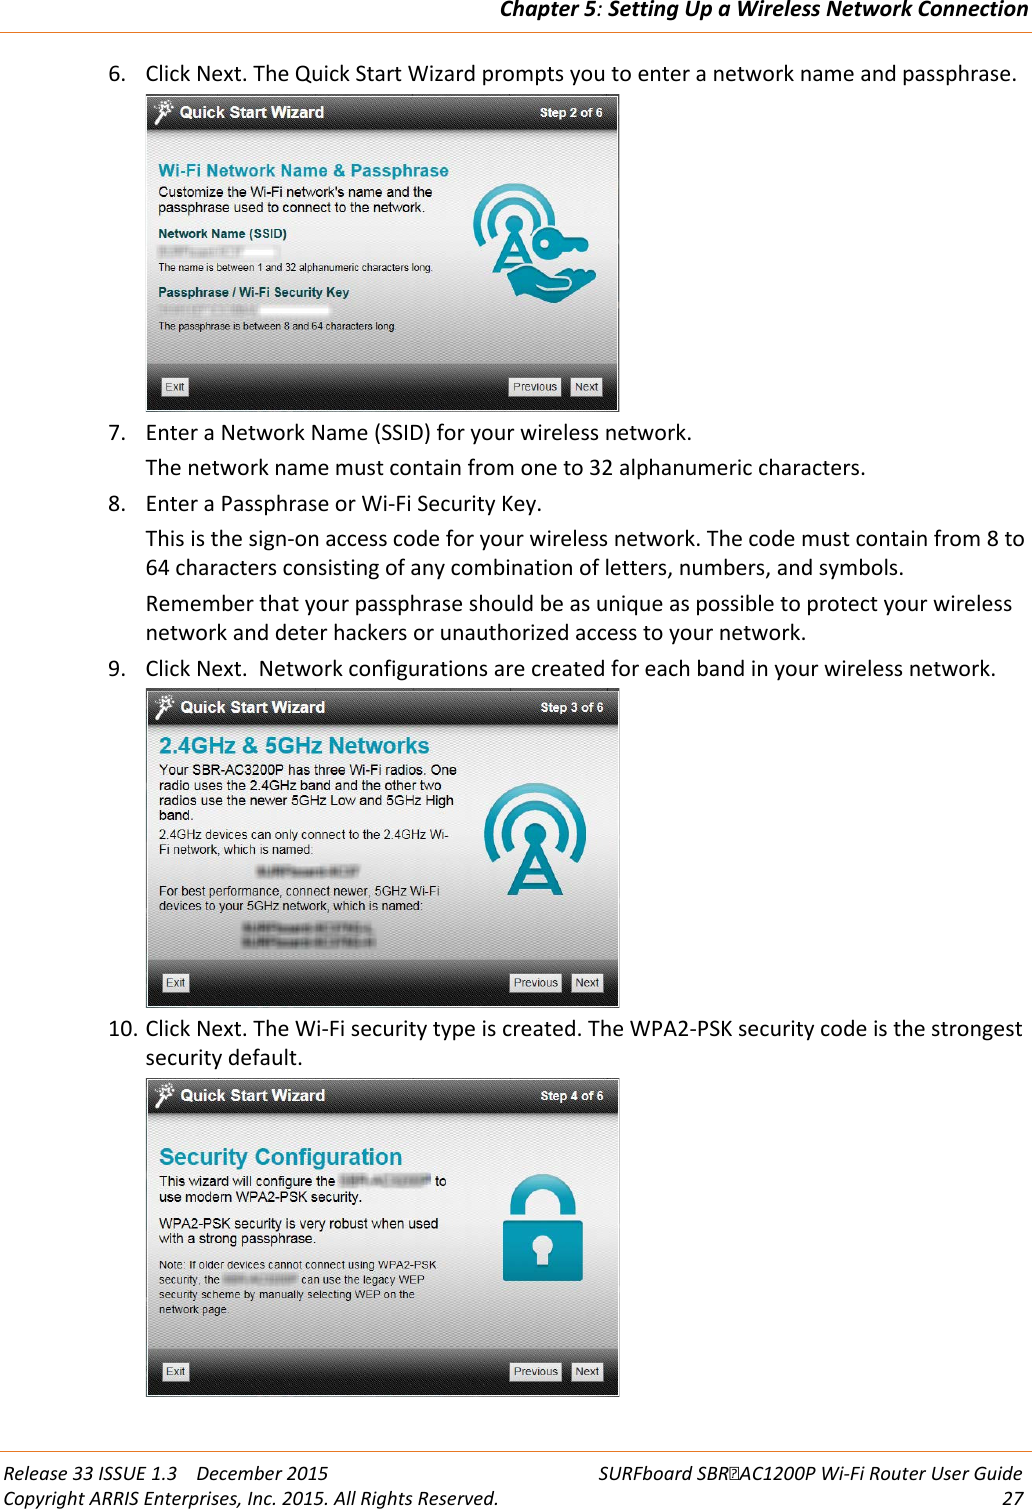 Chapter 5: Setting Up a Wireless Network Connection  Release 33 ISSUE 1.3    December 2015 SURFboard SBRAC1200P Wi-Fi Router User Guide Copyright ARRIS Enterprises, Inc. 2015. All Rights Reserved. 27  6. Click Next. The Quick Start Wizard prompts you to enter a network name and passphrase.  7. Enter a Network Name (SSID) for your wireless network. The network name must contain from one to 32 alphanumeric characters. 8. Enter a Passphrase or Wi-Fi Security Key. This is the sign-on access code for your wireless network. The code must contain from 8 to 64 characters consisting of any combination of letters, numbers, and symbols.  Remember that your passphrase should be as unique as possible to protect your wireless network and deter hackers or unauthorized access to your network. 9. Click Next.  Network configurations are created for each band in your wireless network.   10. Click Next. The Wi-Fi security type is created. The WPA2-PSK security code is the strongest security default.   